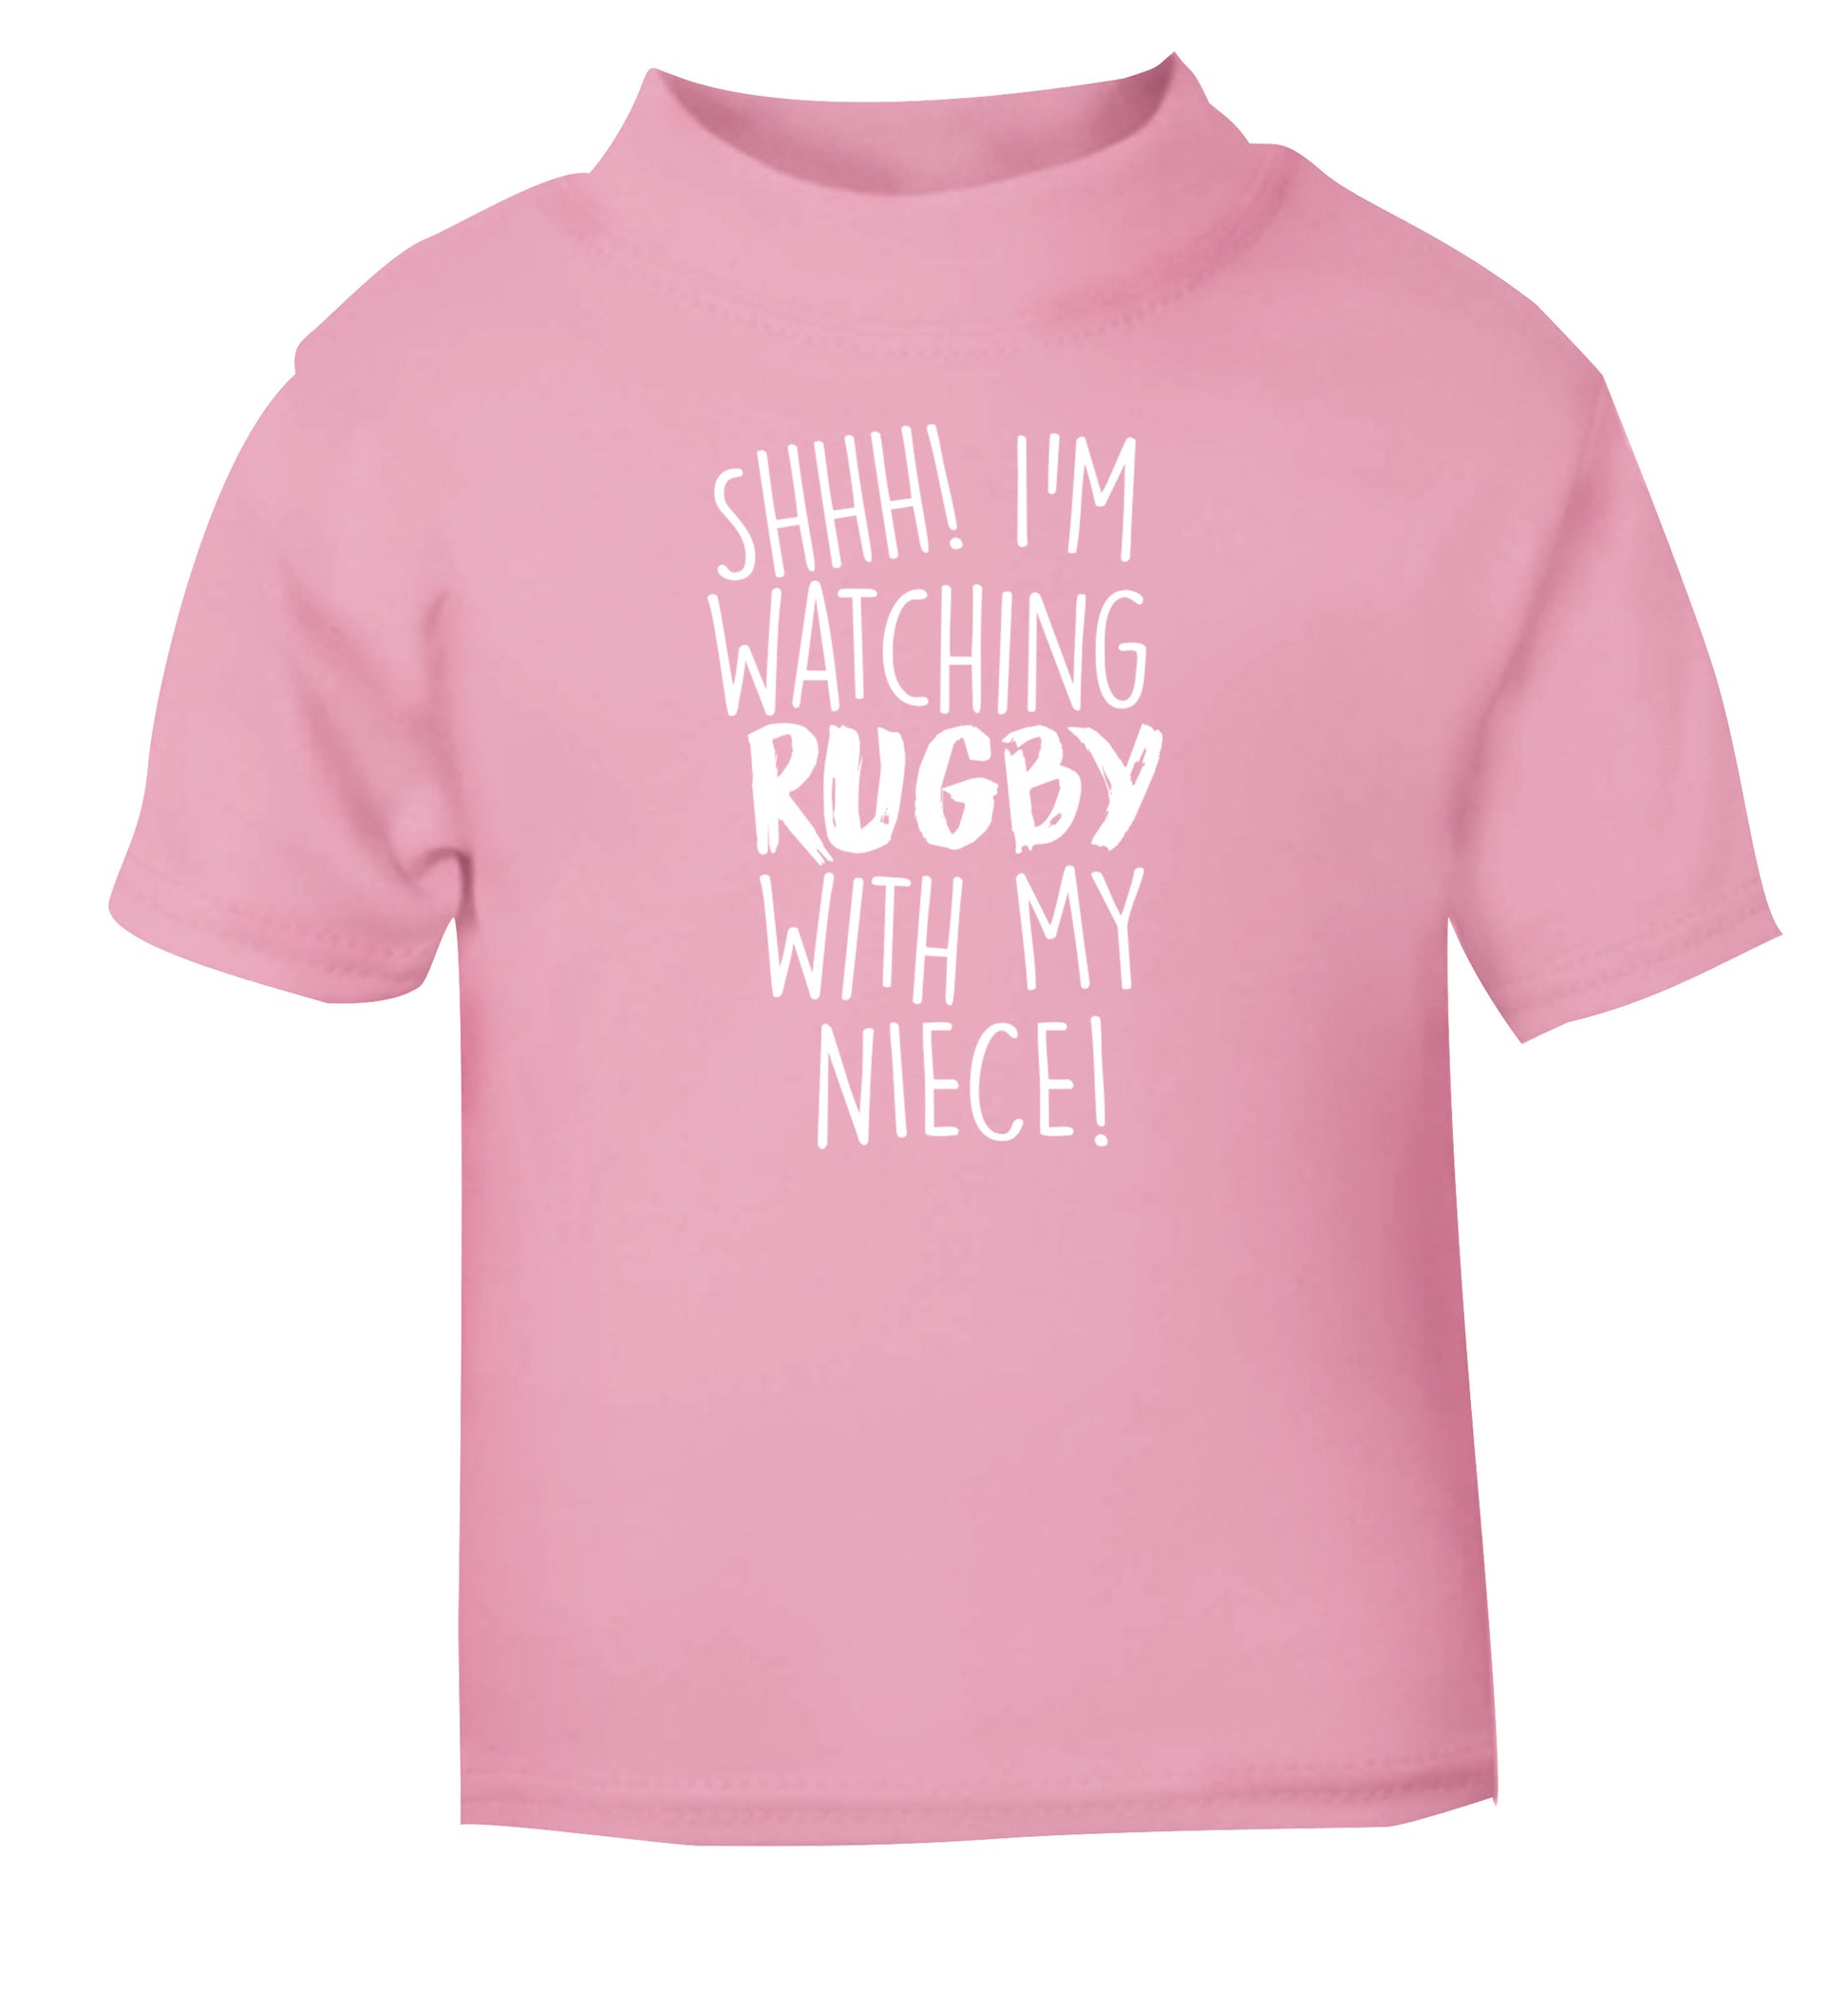 Shh.. I'm watching rugby with my niece light pink Baby Toddler Tshirt 2 Years